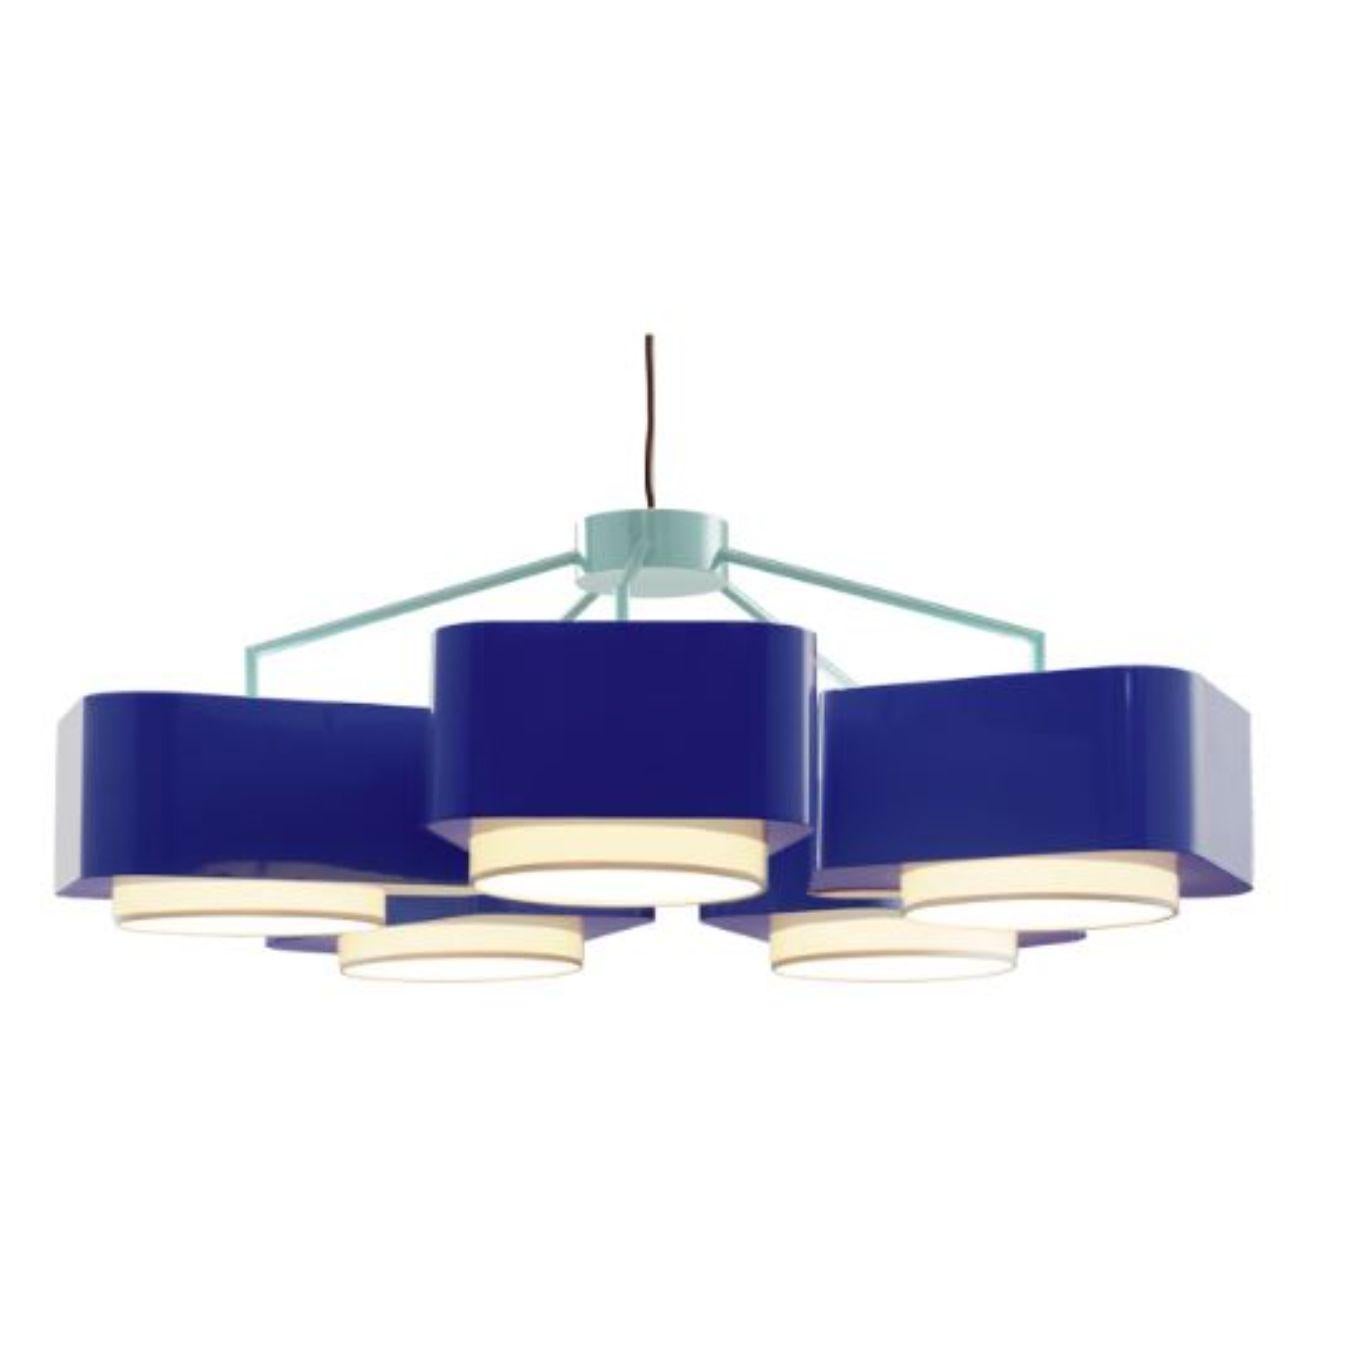 Jade and cobalt carousel suspension lamp by Dooq
Dimensions: W 110 x D 110 x H 40 cm
Materials: lacquered metal.
abat-jour: cotton
Also available in different colors.

Information:
230V/50Hz
E27/5x20W LED
120V/60Hz
E26/5x15W LED
bulbs not